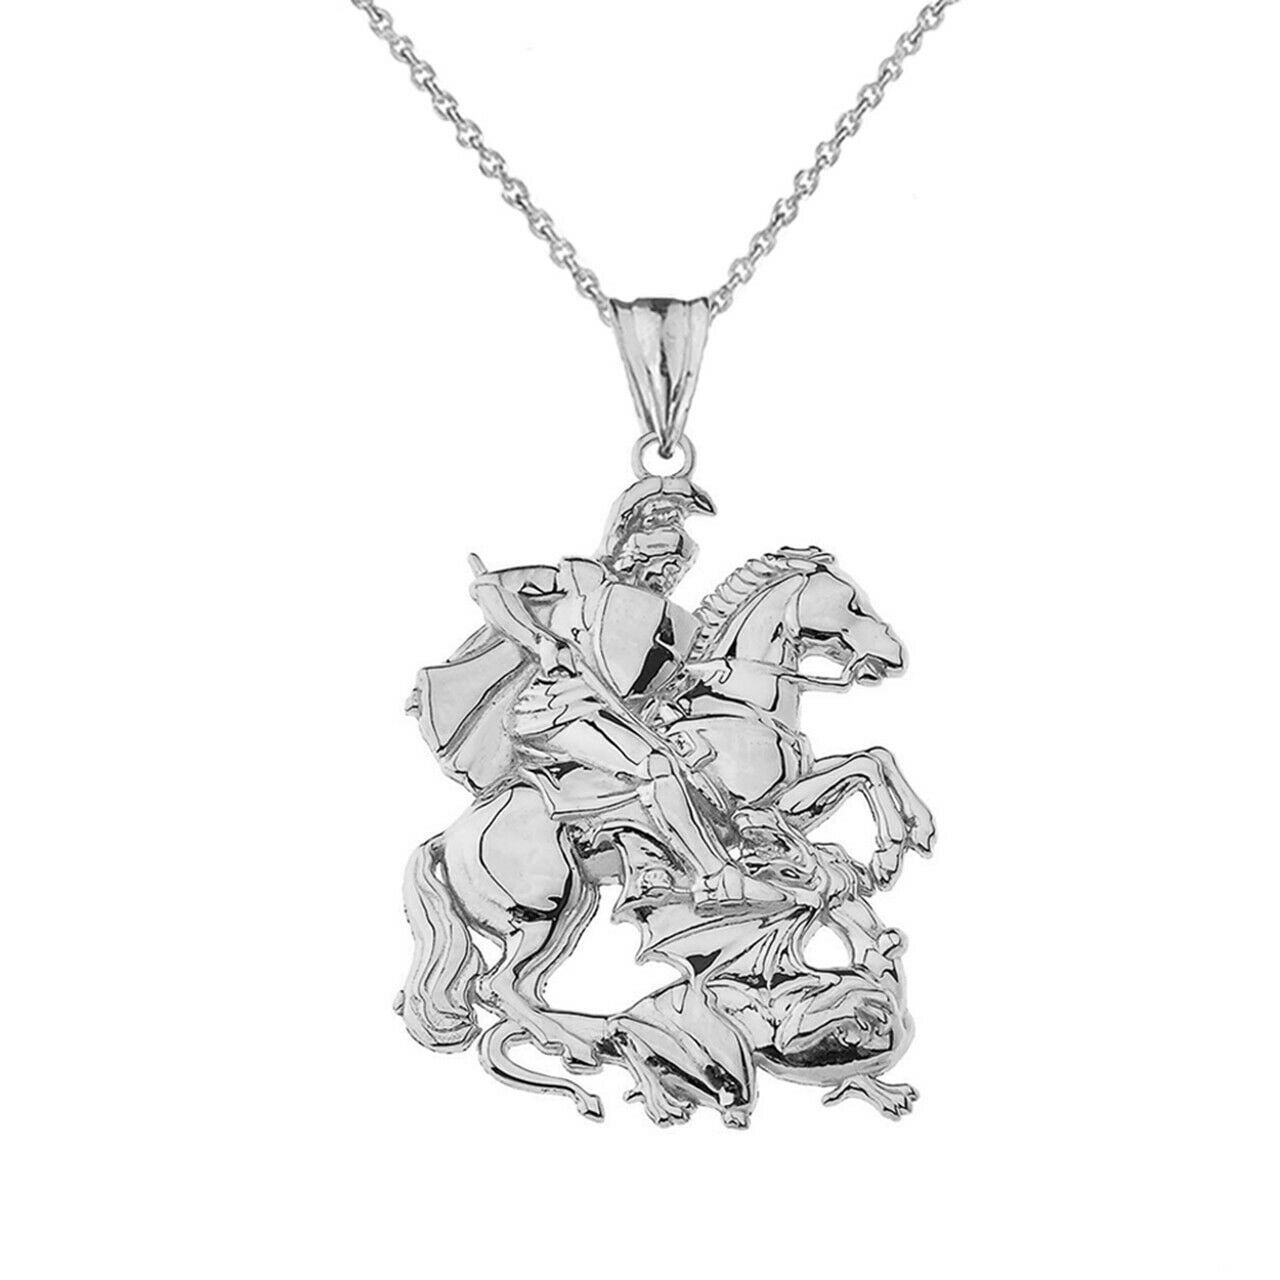 925 Sterling Silver Saint George Pendant Necklace - £25.06 GBP - £44.76 GBP